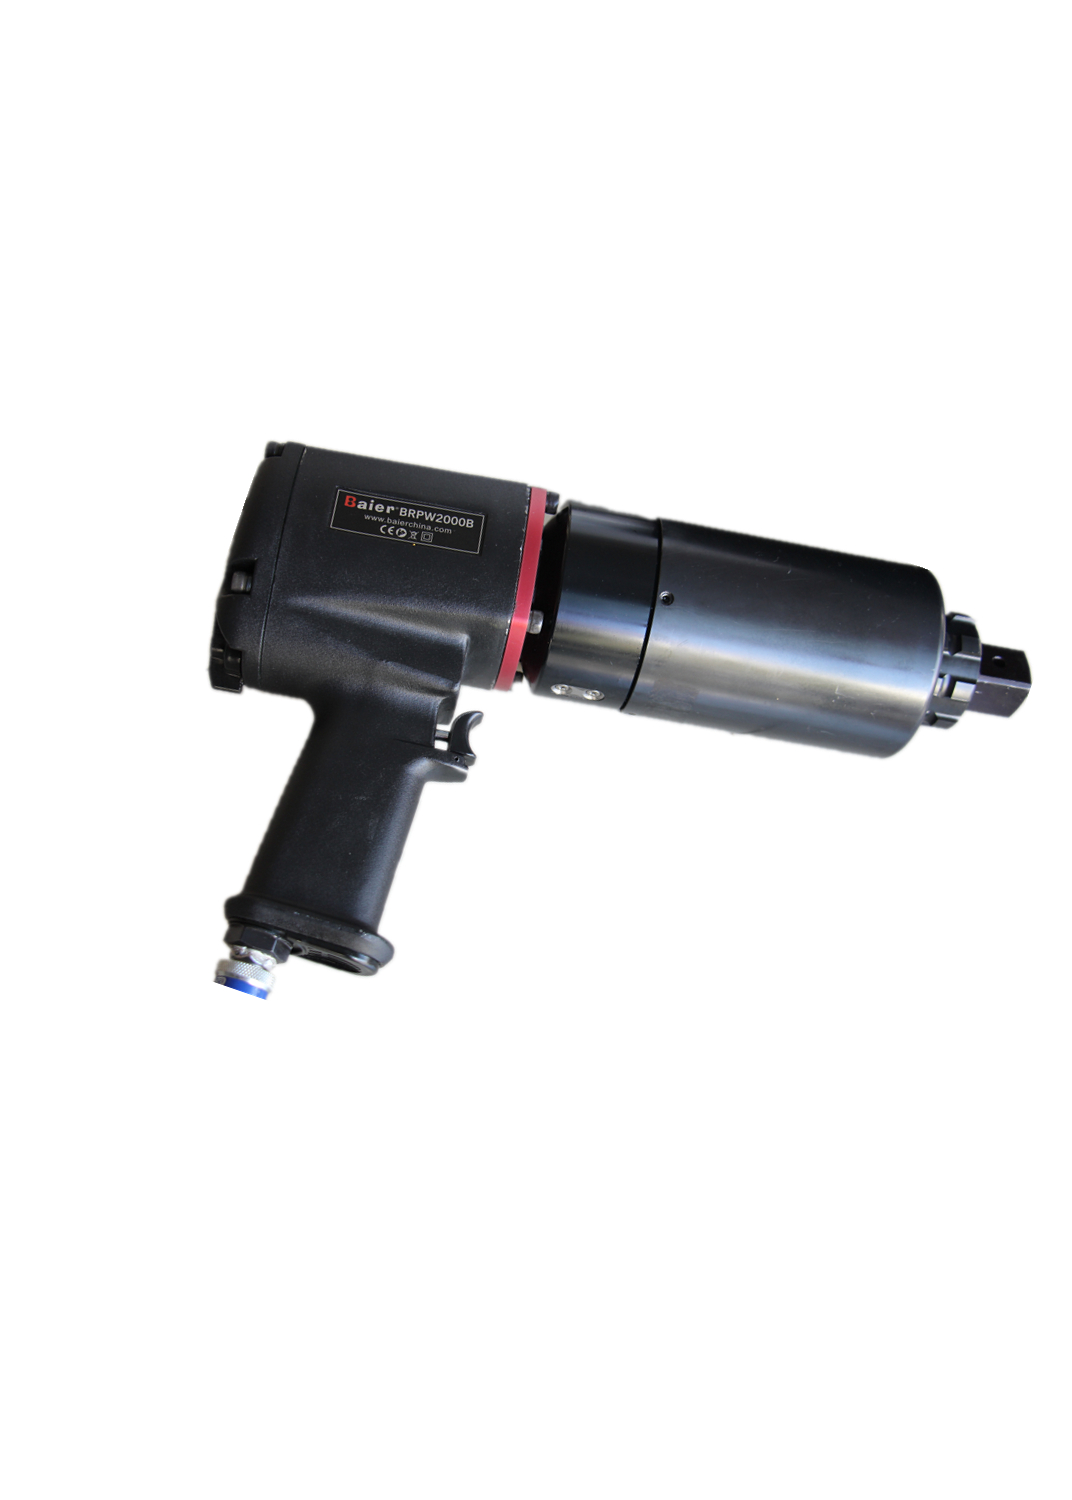 Lion Gun Professional Pneumatic Torque Wrench for Lug Nuts